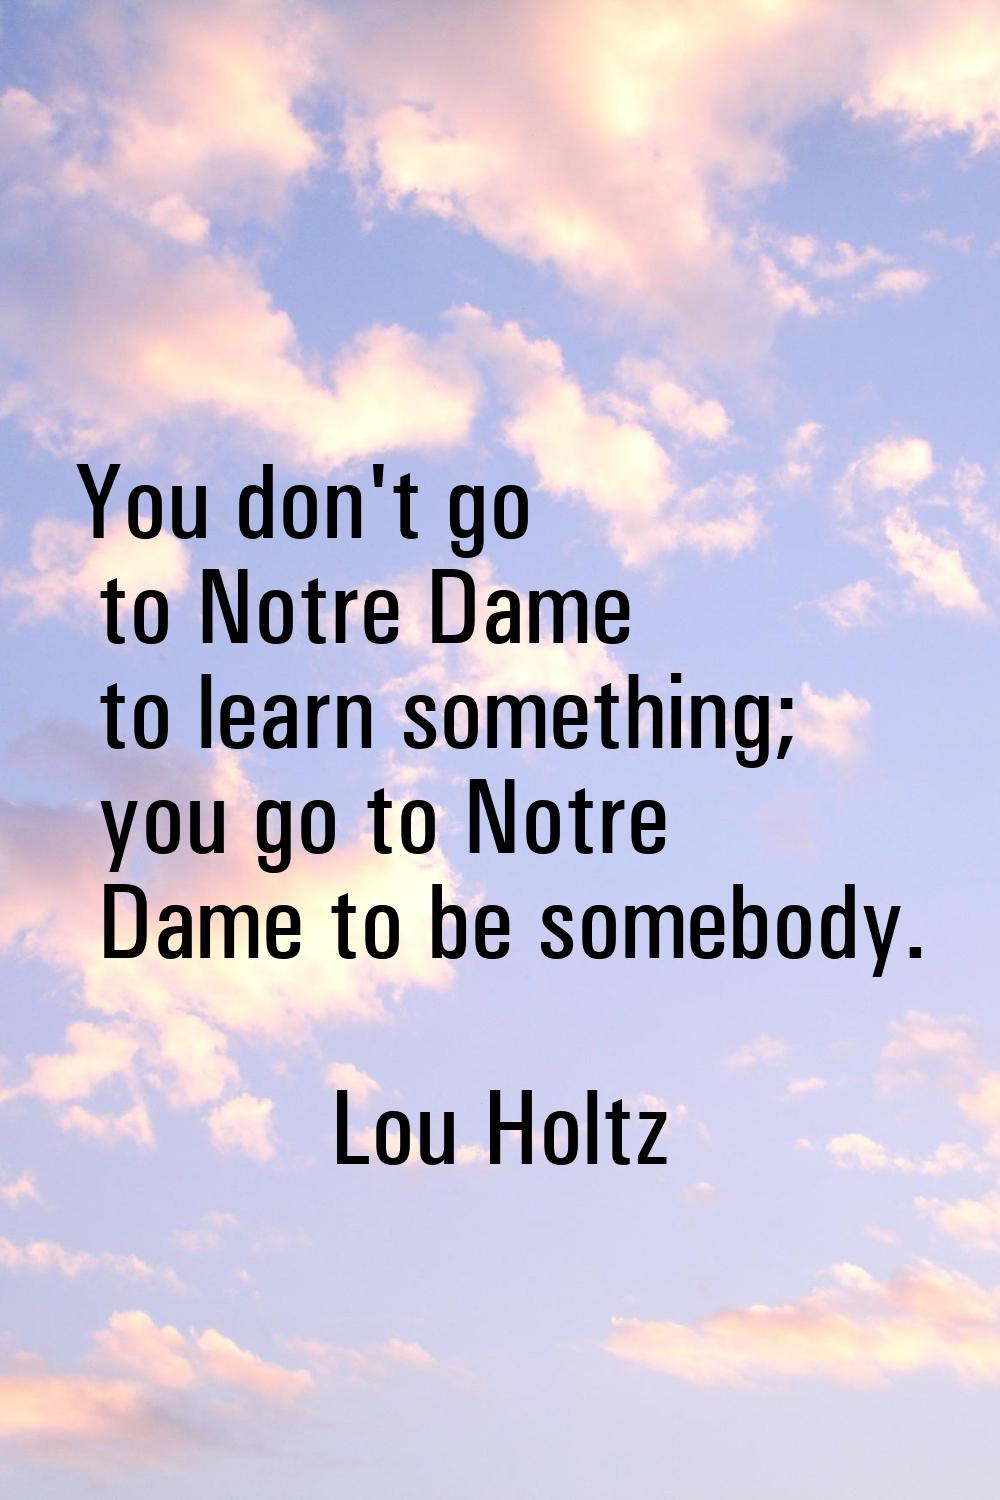 You don't go to Notre Dame to learn something; you go to Notre Dame to be somebody.